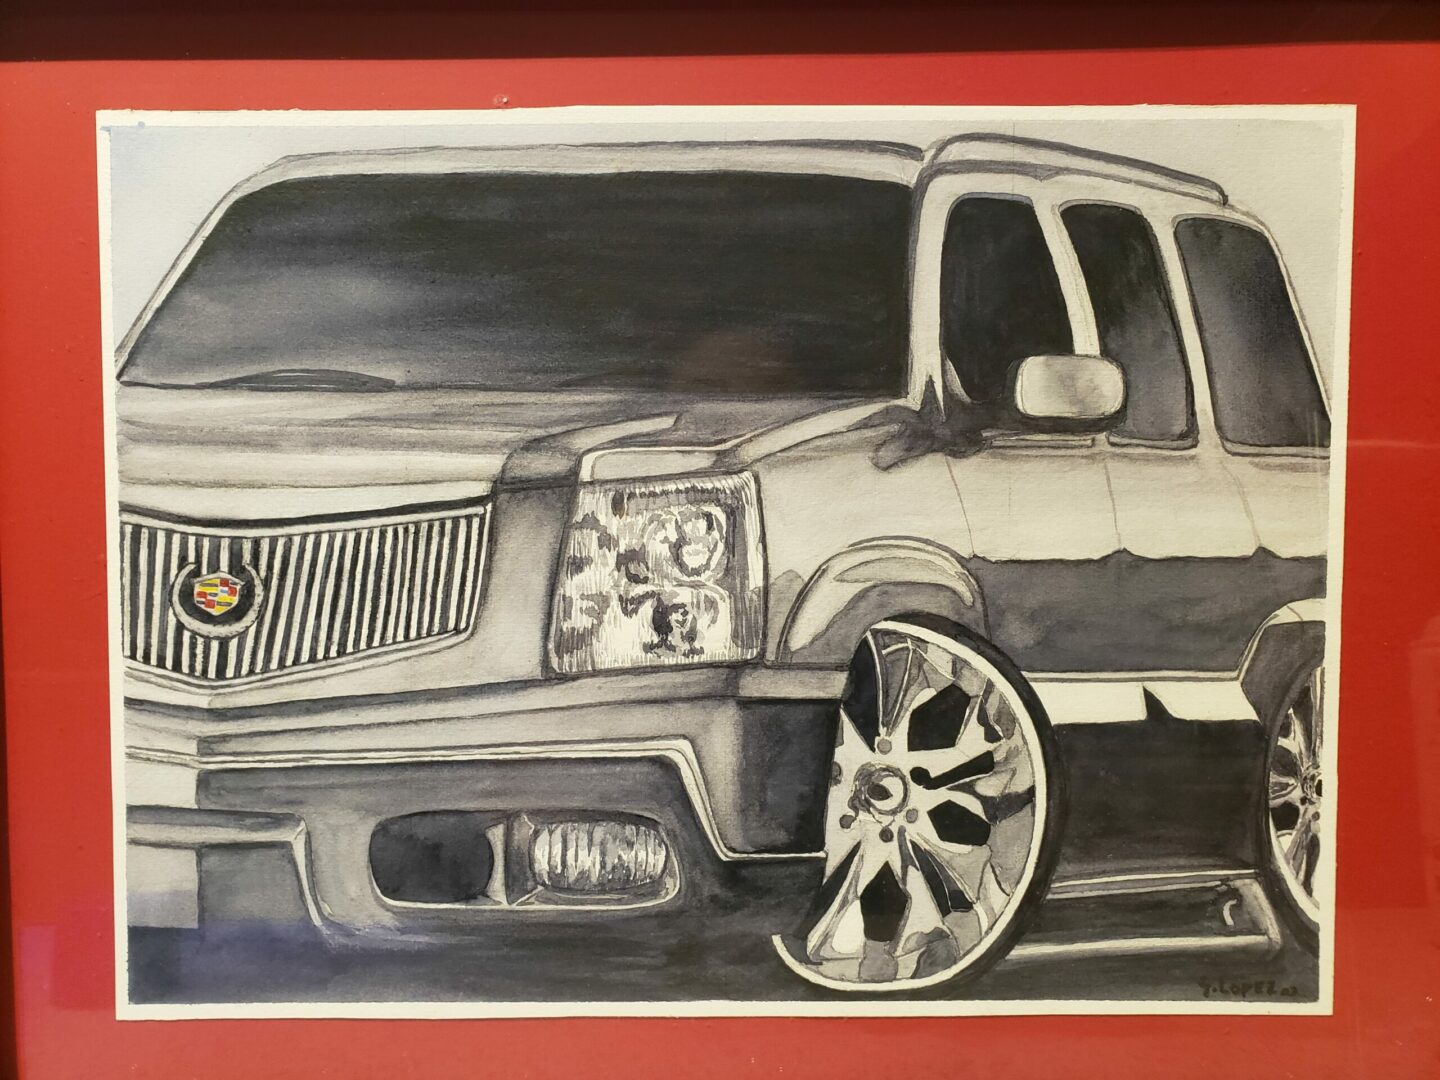 A drawing of a car on paper